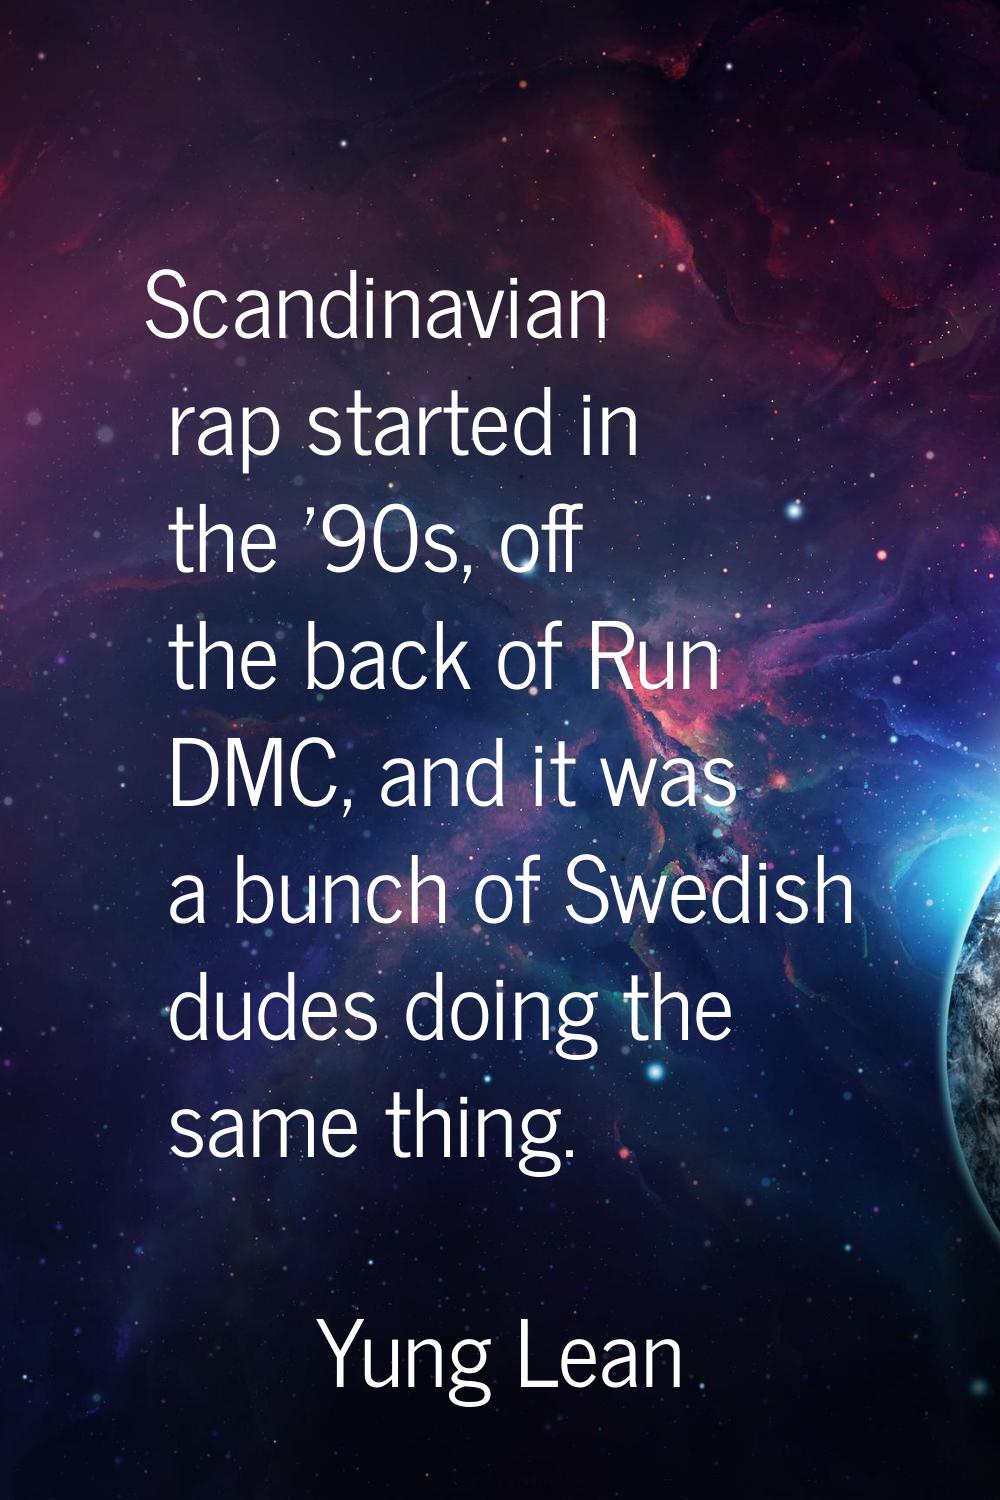 Scandinavian rap started in the '90s, off the back of Run DMC, and it was a bunch of Swedish dudes 